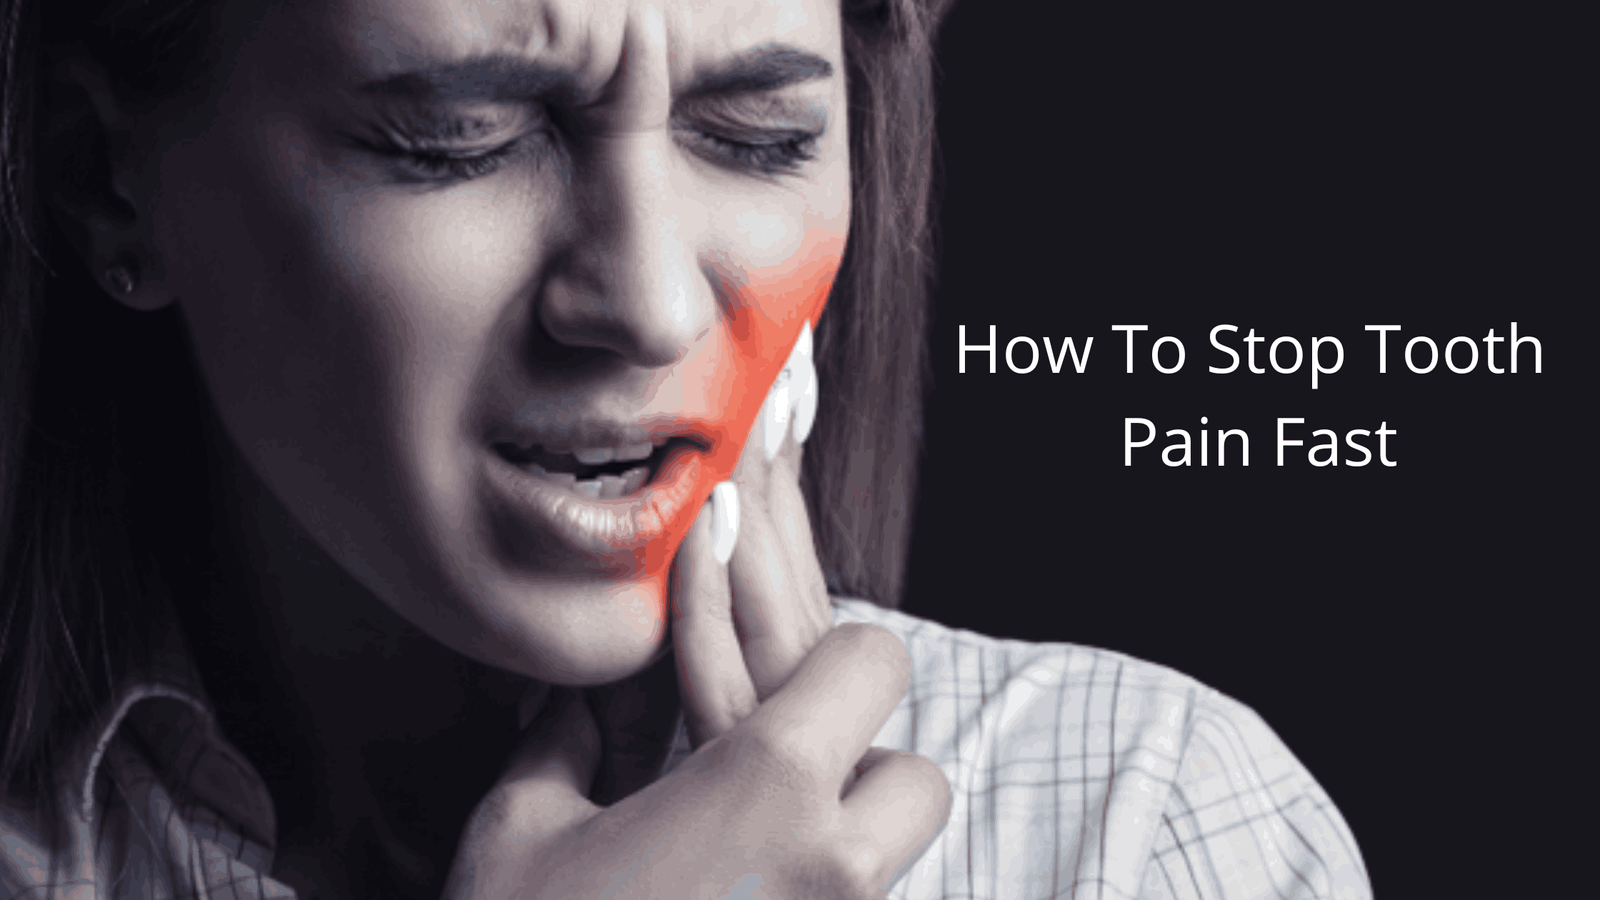 How To Stop Tooth Pain Fast